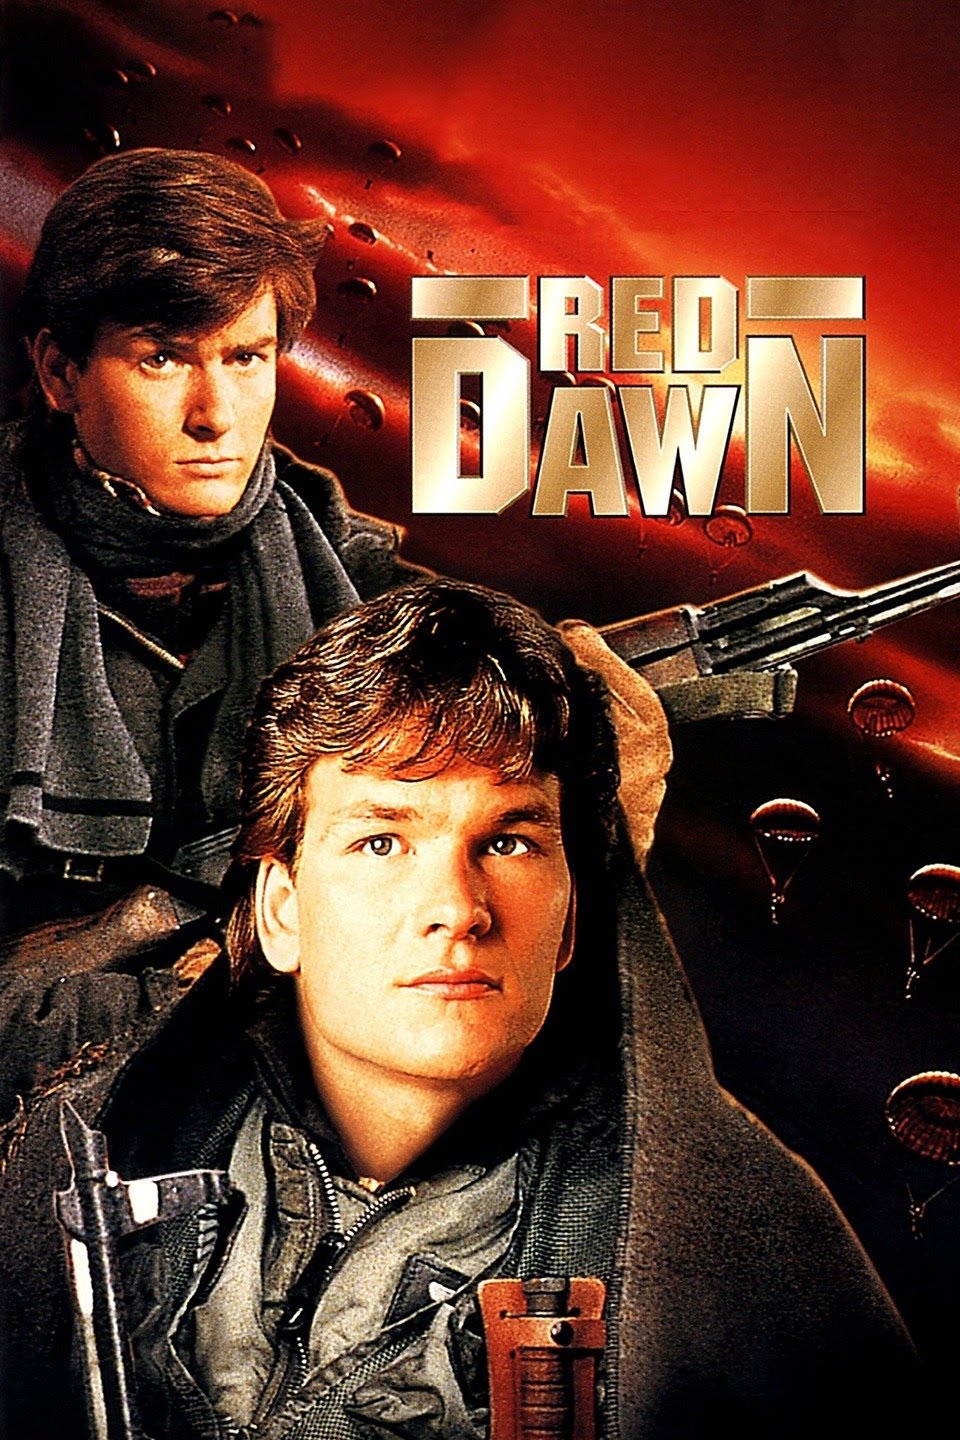 https://static.wikia.nocookie.net/listofdeaths/images/6/61/Red_Dawn_poster.jpg/revision/latest?cb=20211114073259